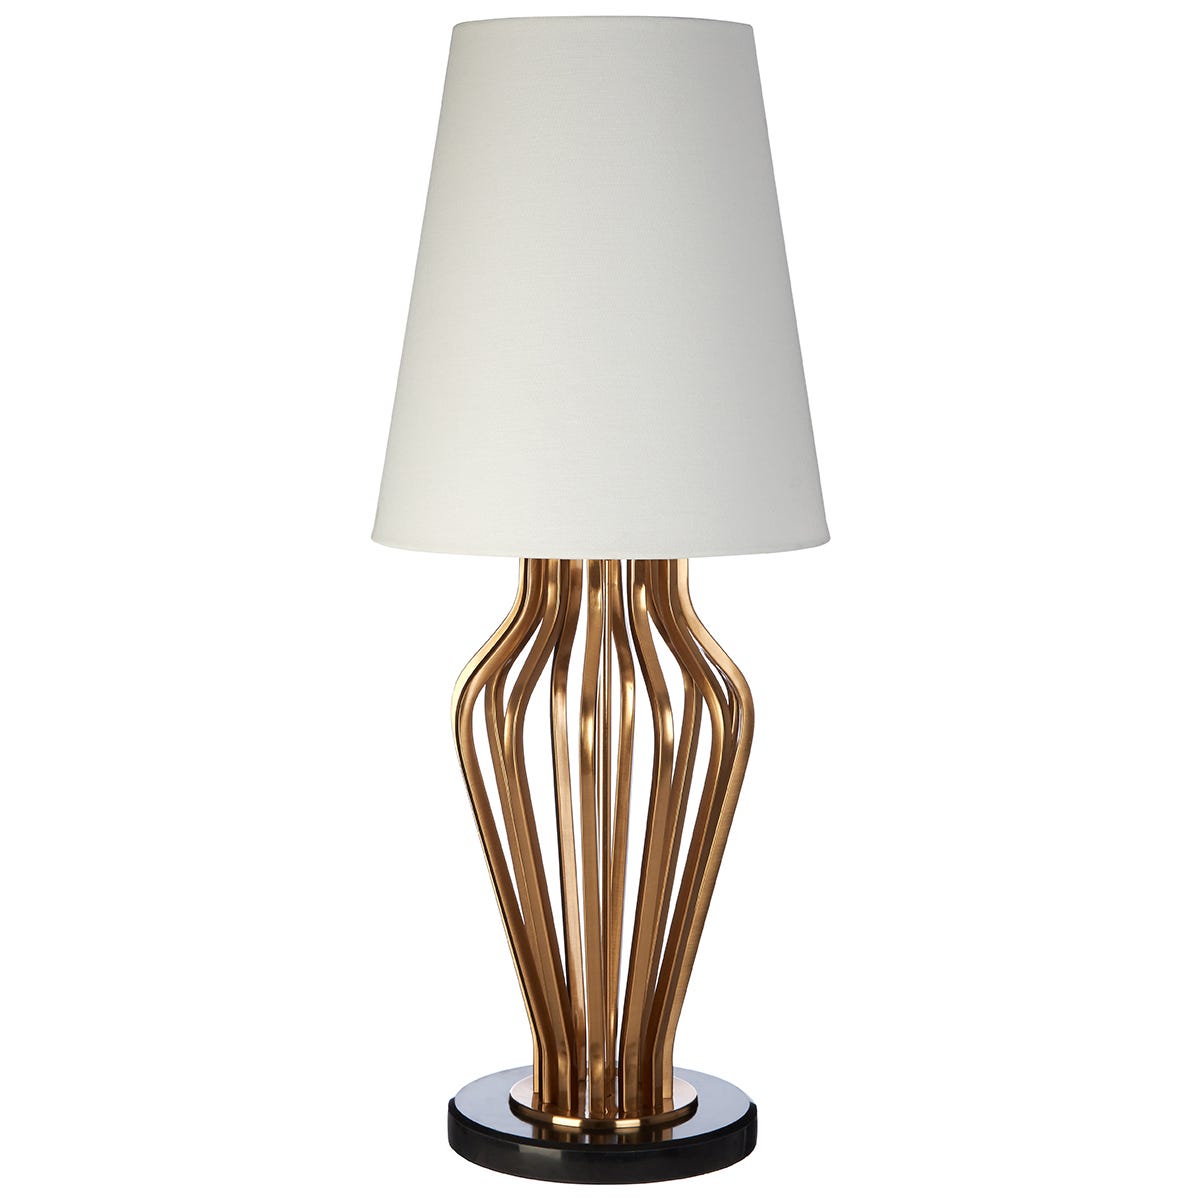 Premier Housewares Zada Table Lamp in Gold Finish with Marble Base & Linen Shade